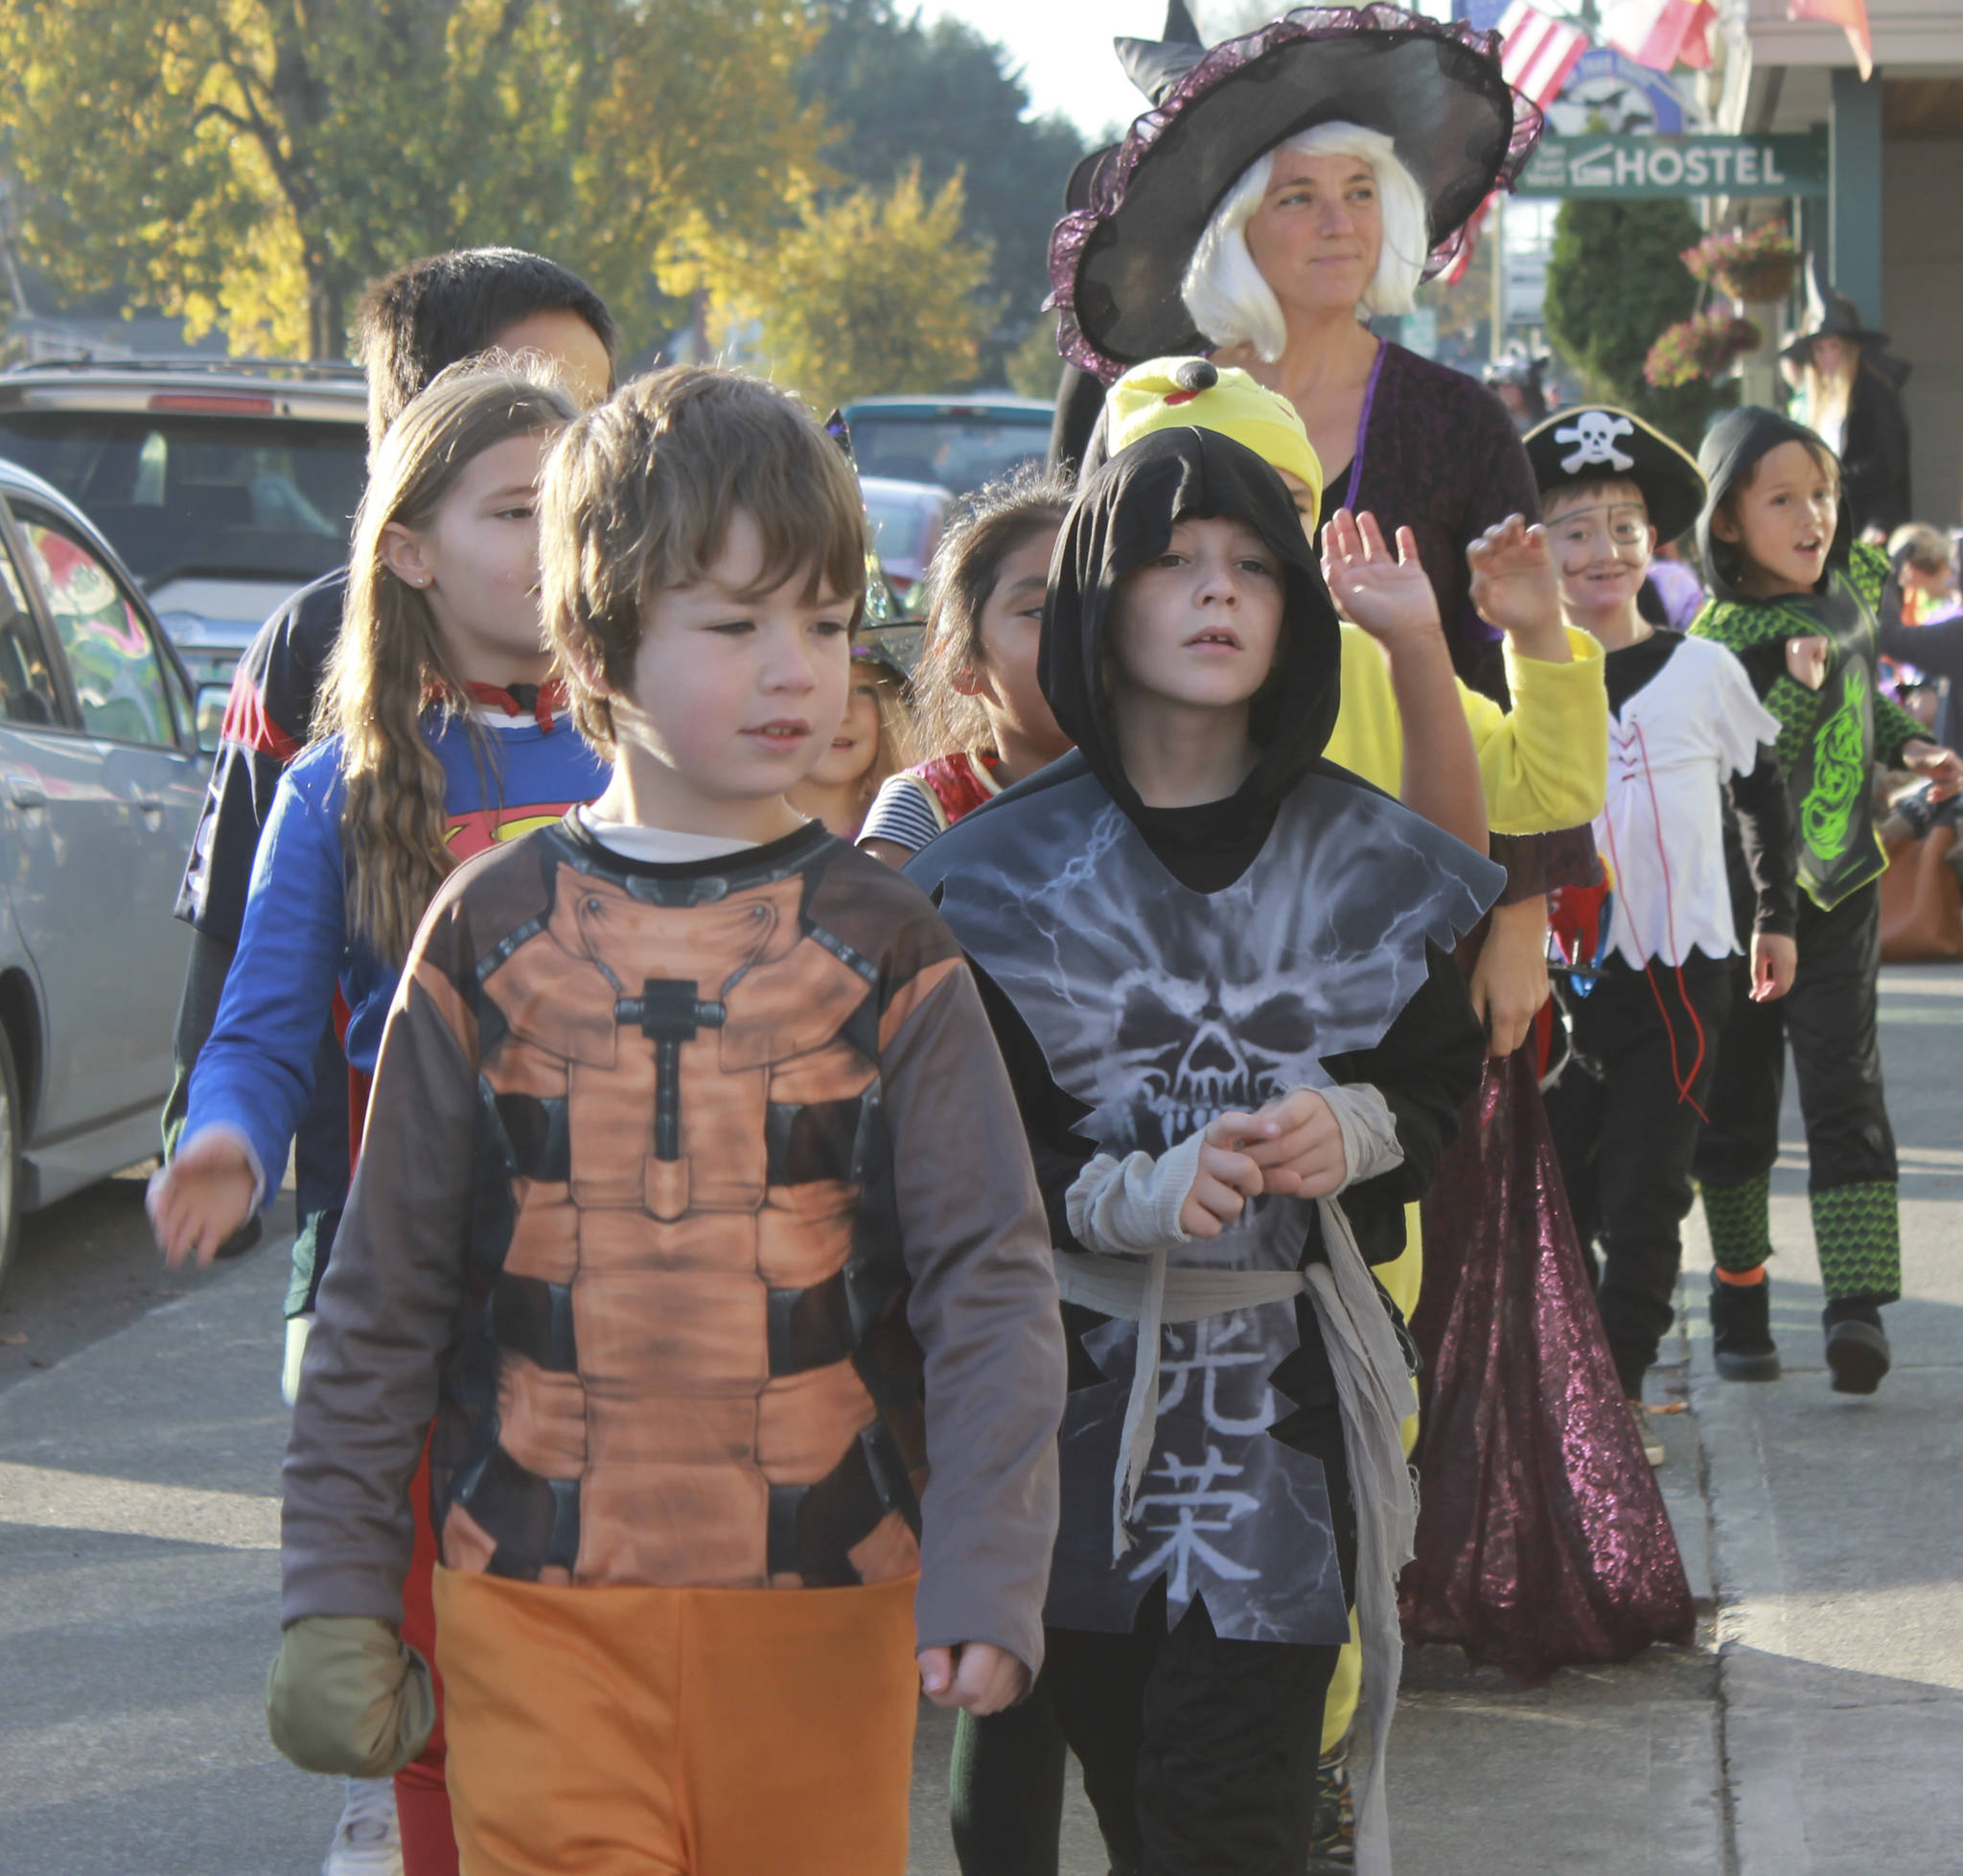 Staff photo/Heather Spaulding                                Friday Harbor Elementary School students parade their costumes down Argyle Avenue on Halloween.